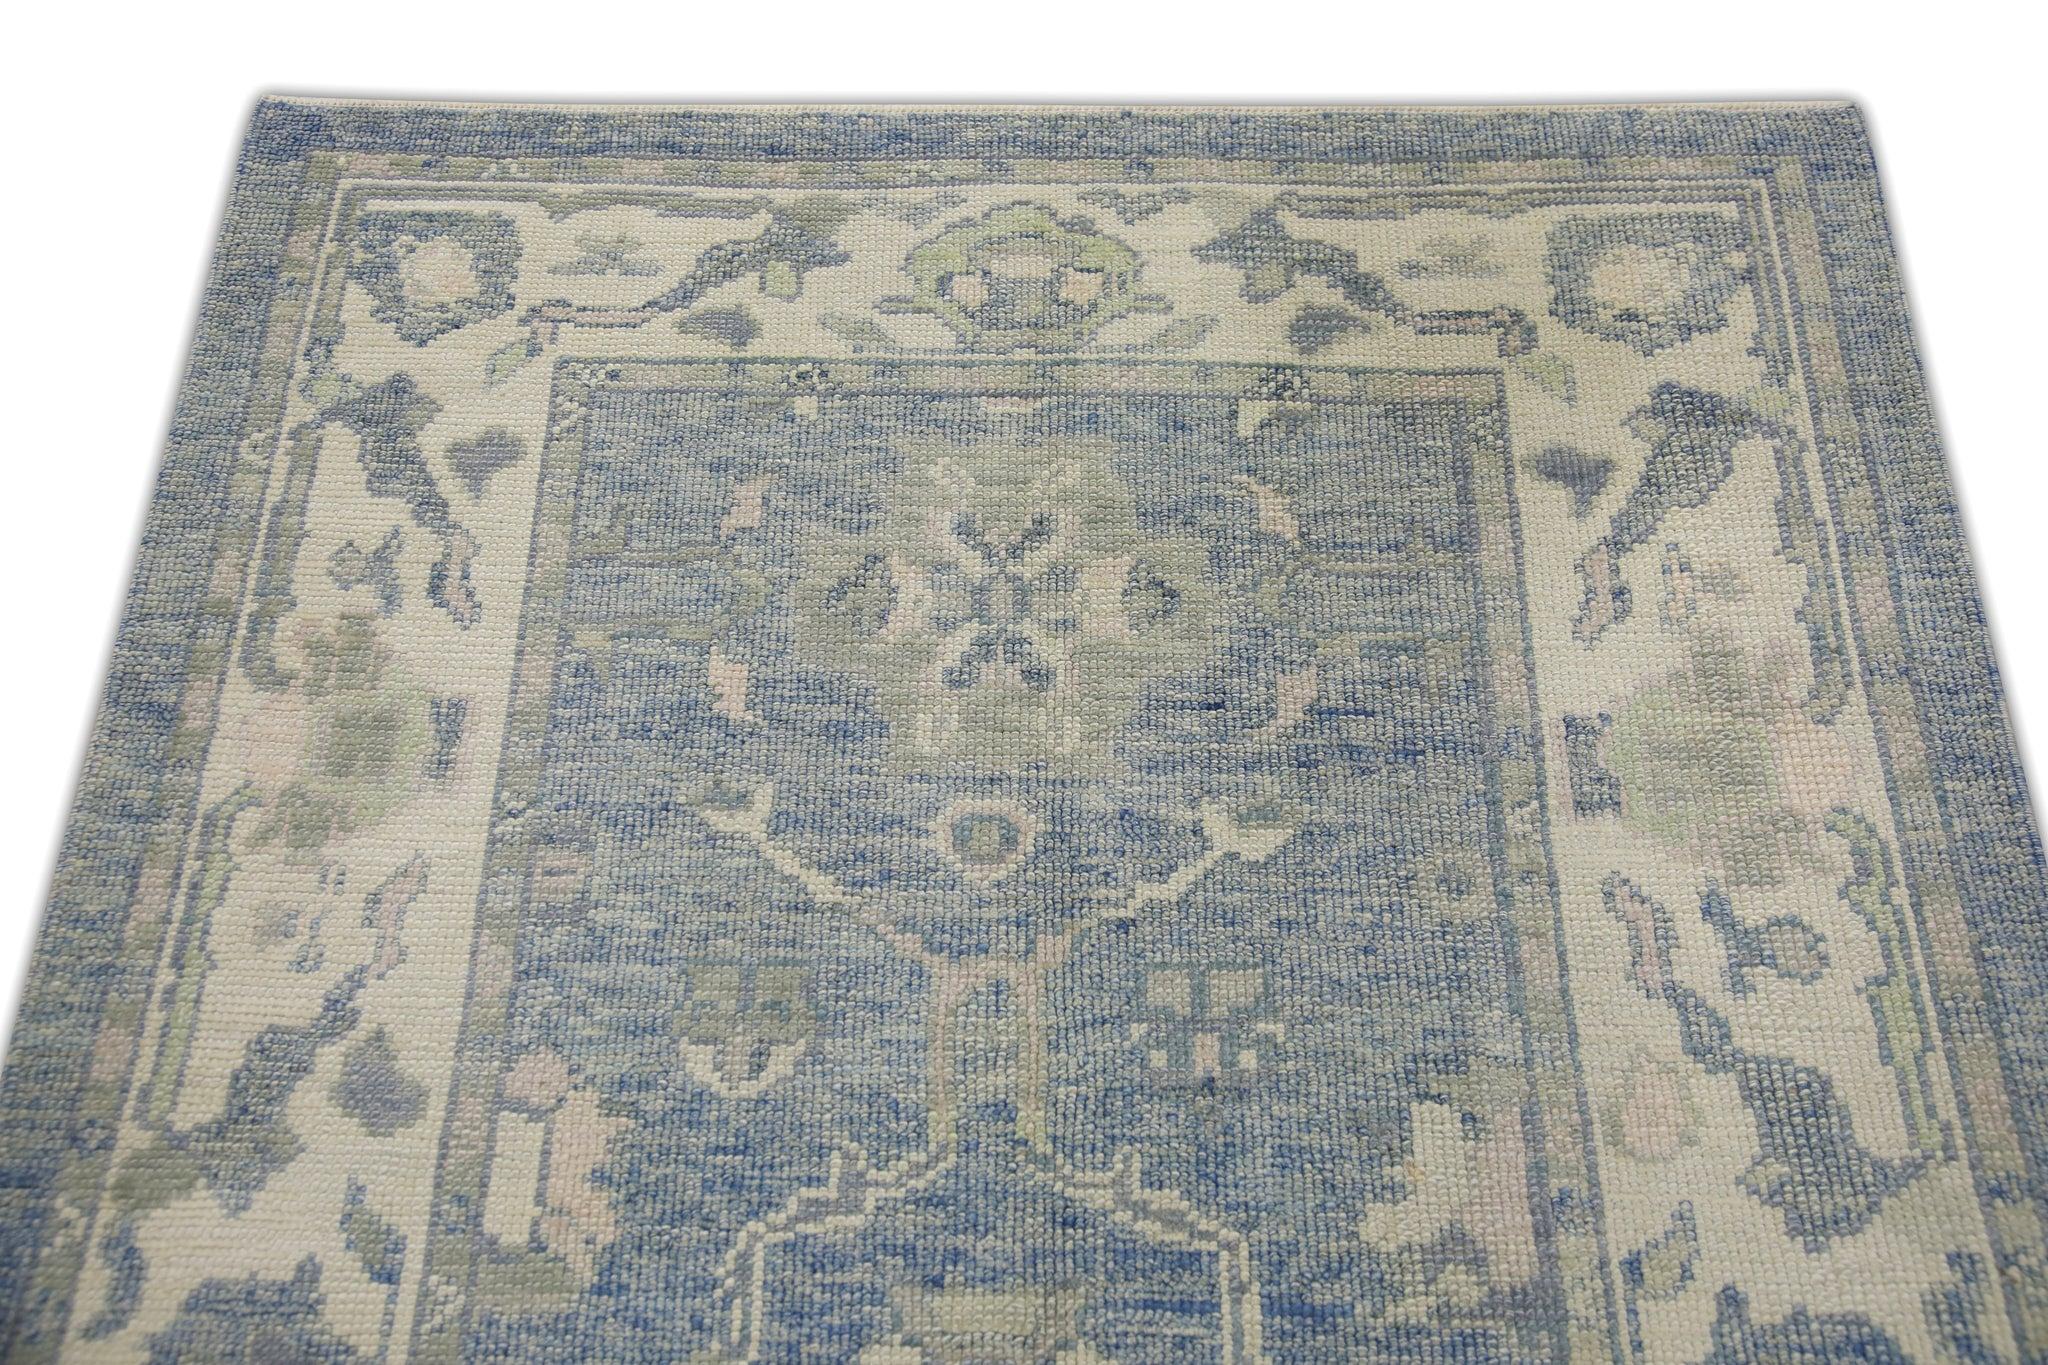 Vegetable Dyed Blue Handwoven Wool Turkish Oushak Rug with Green Floral Pattern 4'1